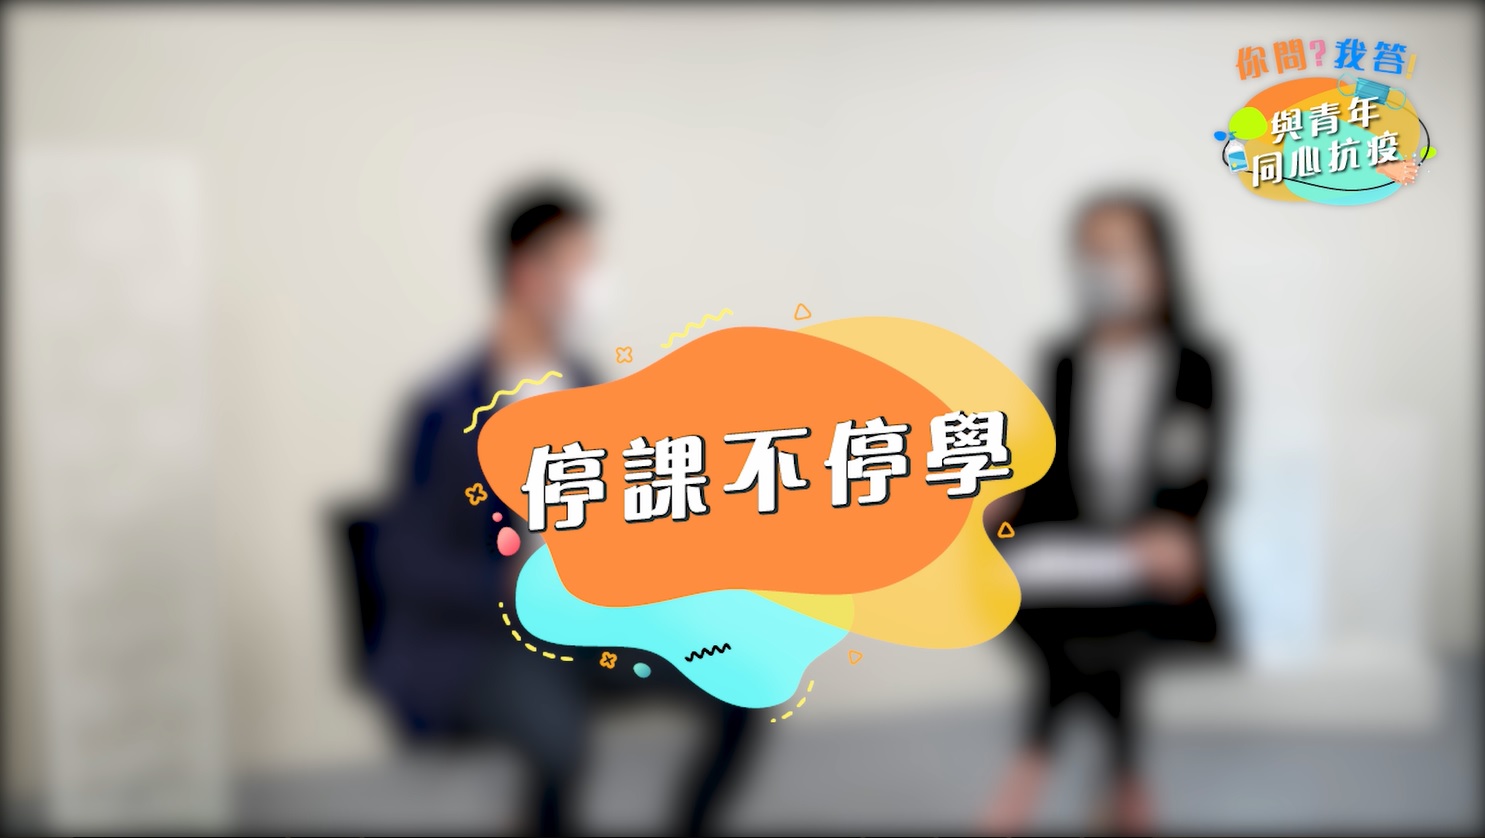 Episode 2 Suspending Classes without Suspending Learning (Cantonese)